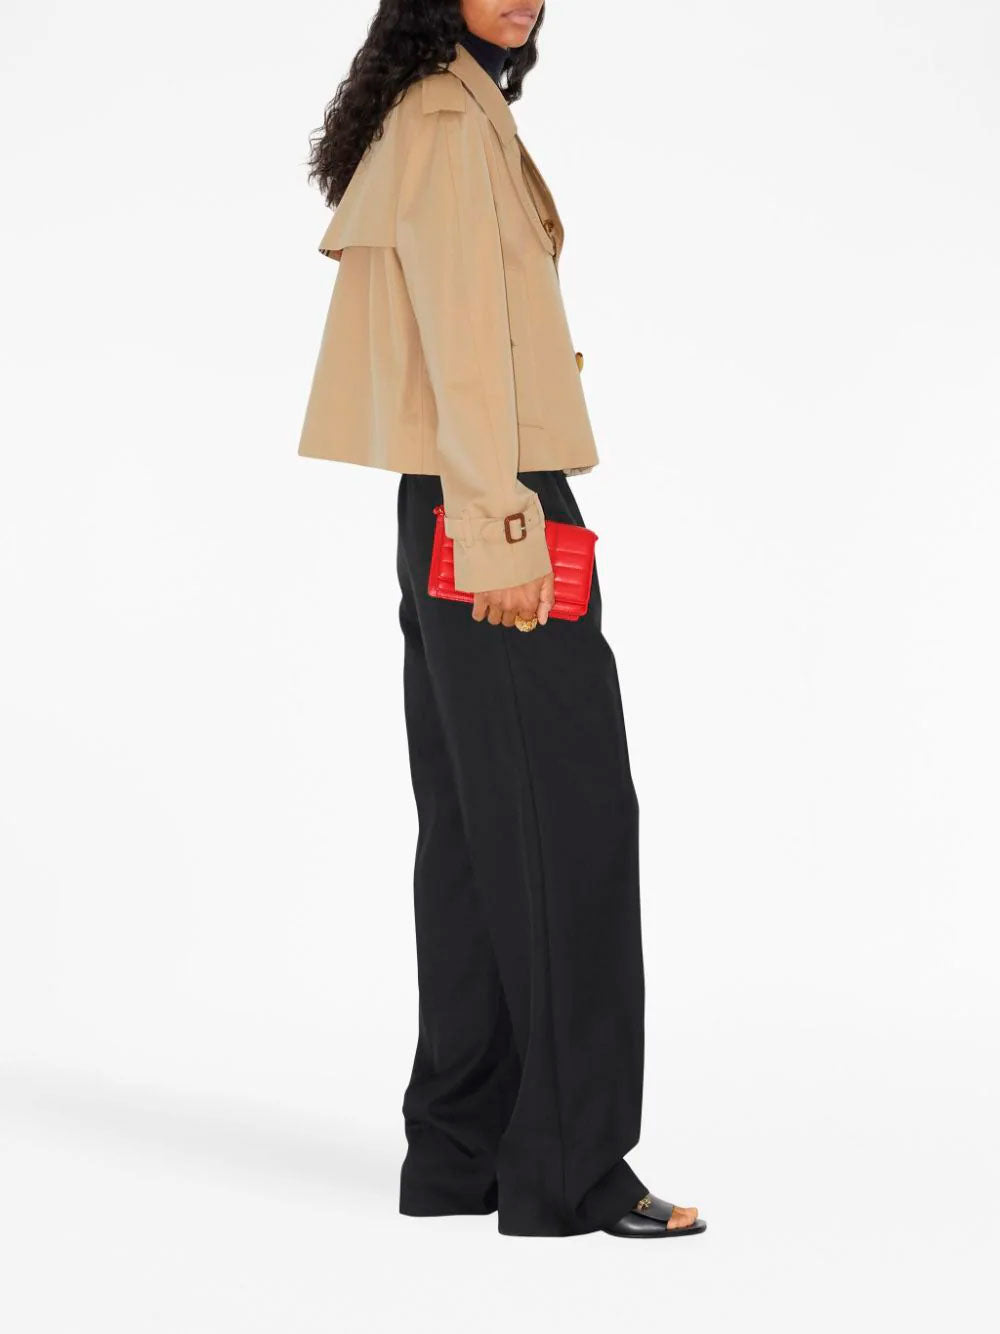 Haltye cropped trench